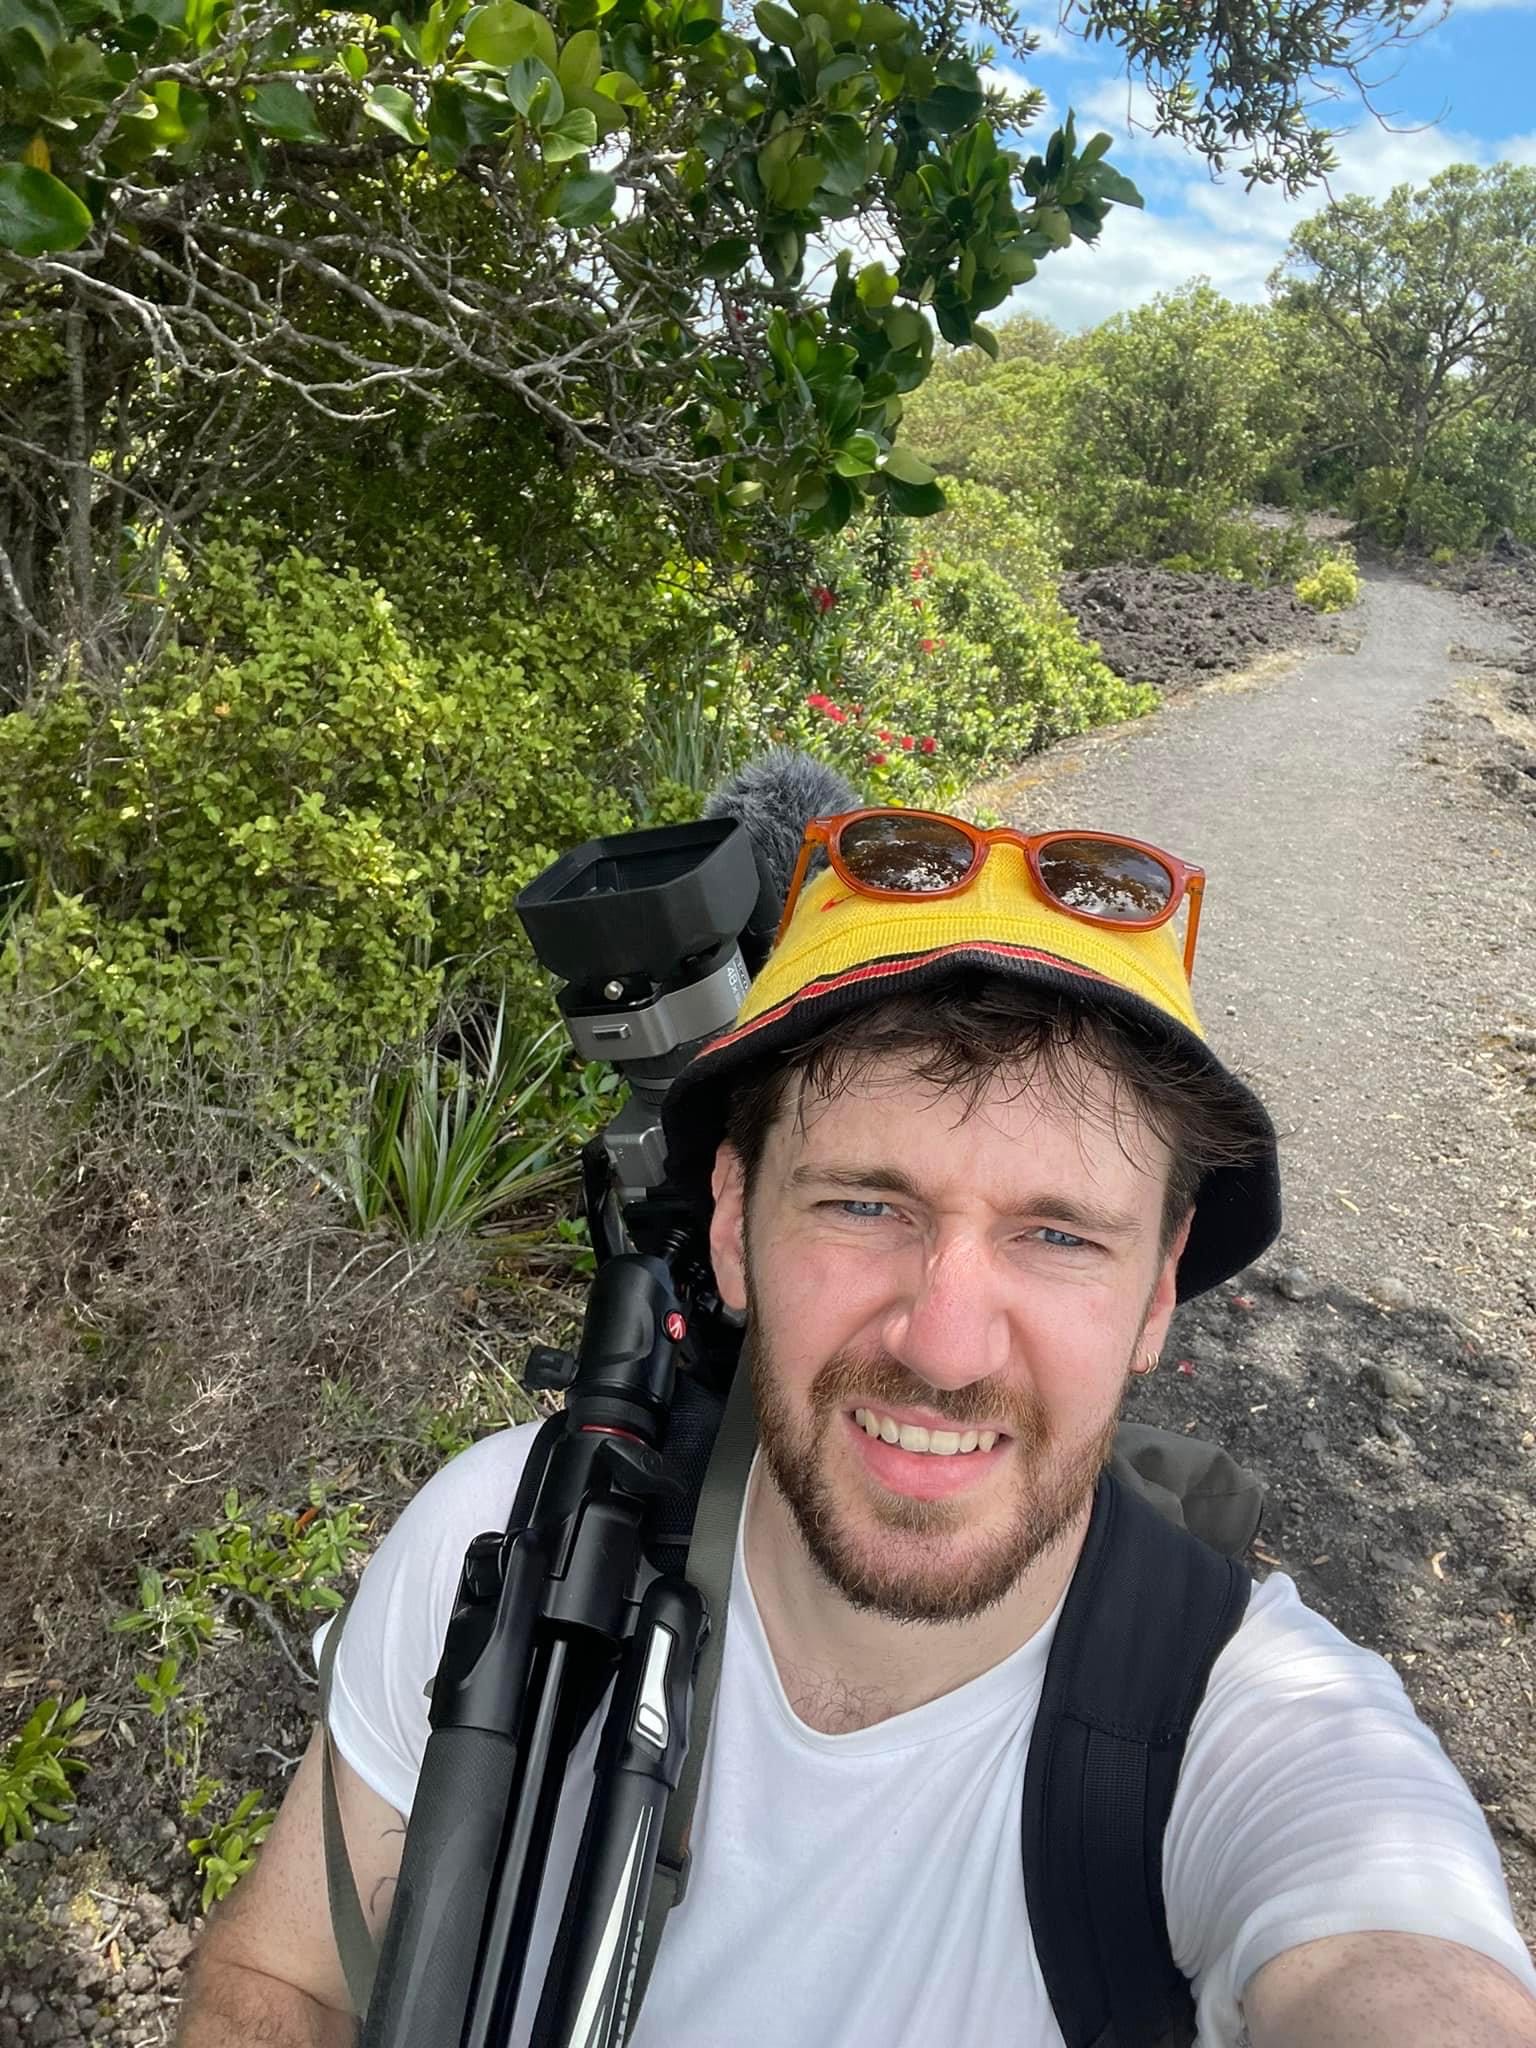 image of man wearing hat and carrying camera on a trail outdoors